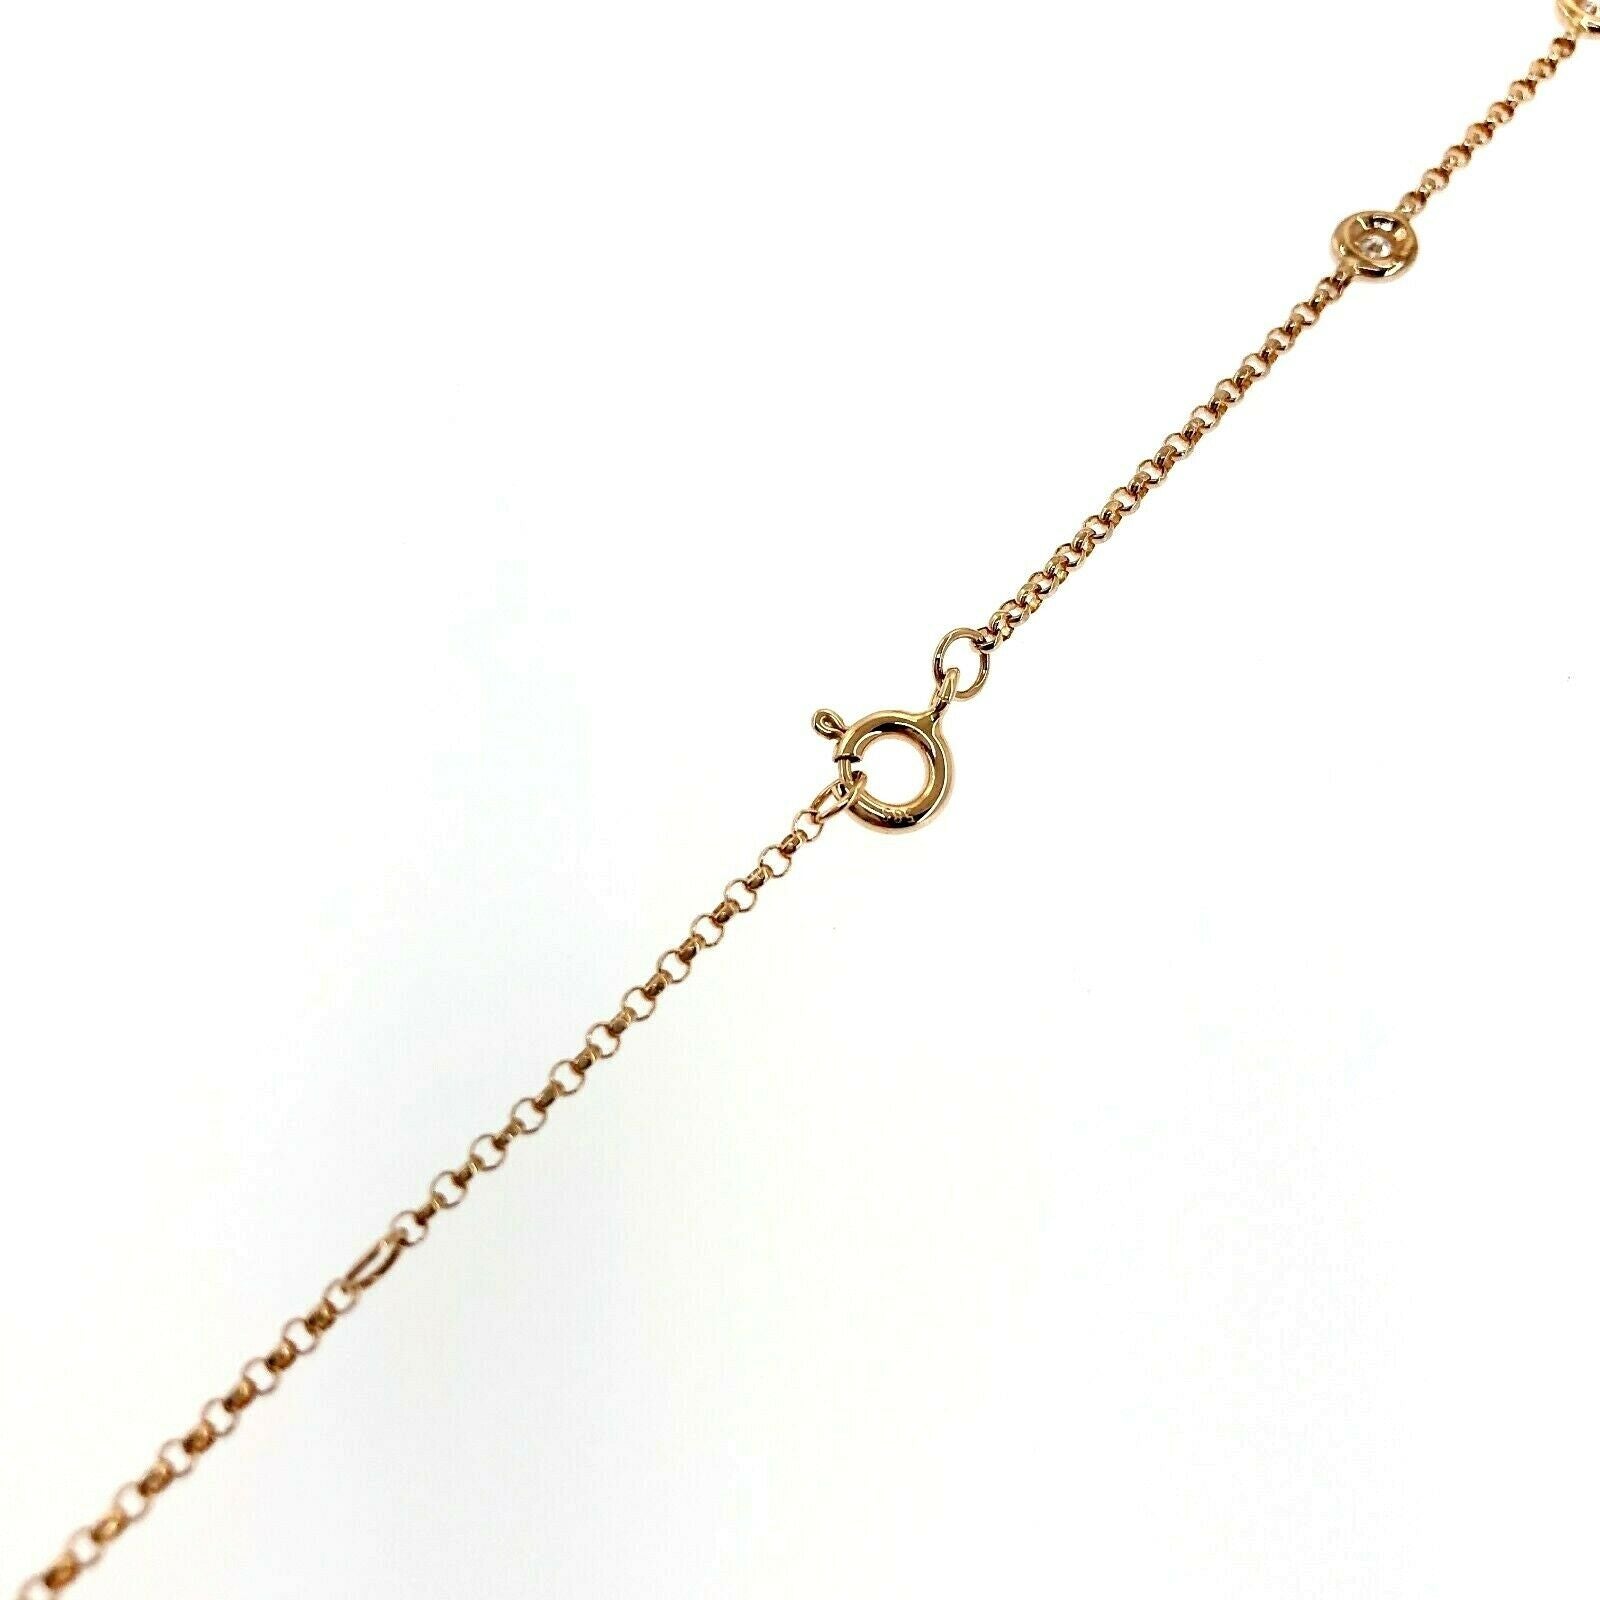 0.63 Carats t.w. Hand Assembled Diamond by The Yard Necklace Chain 14K Rose Gold